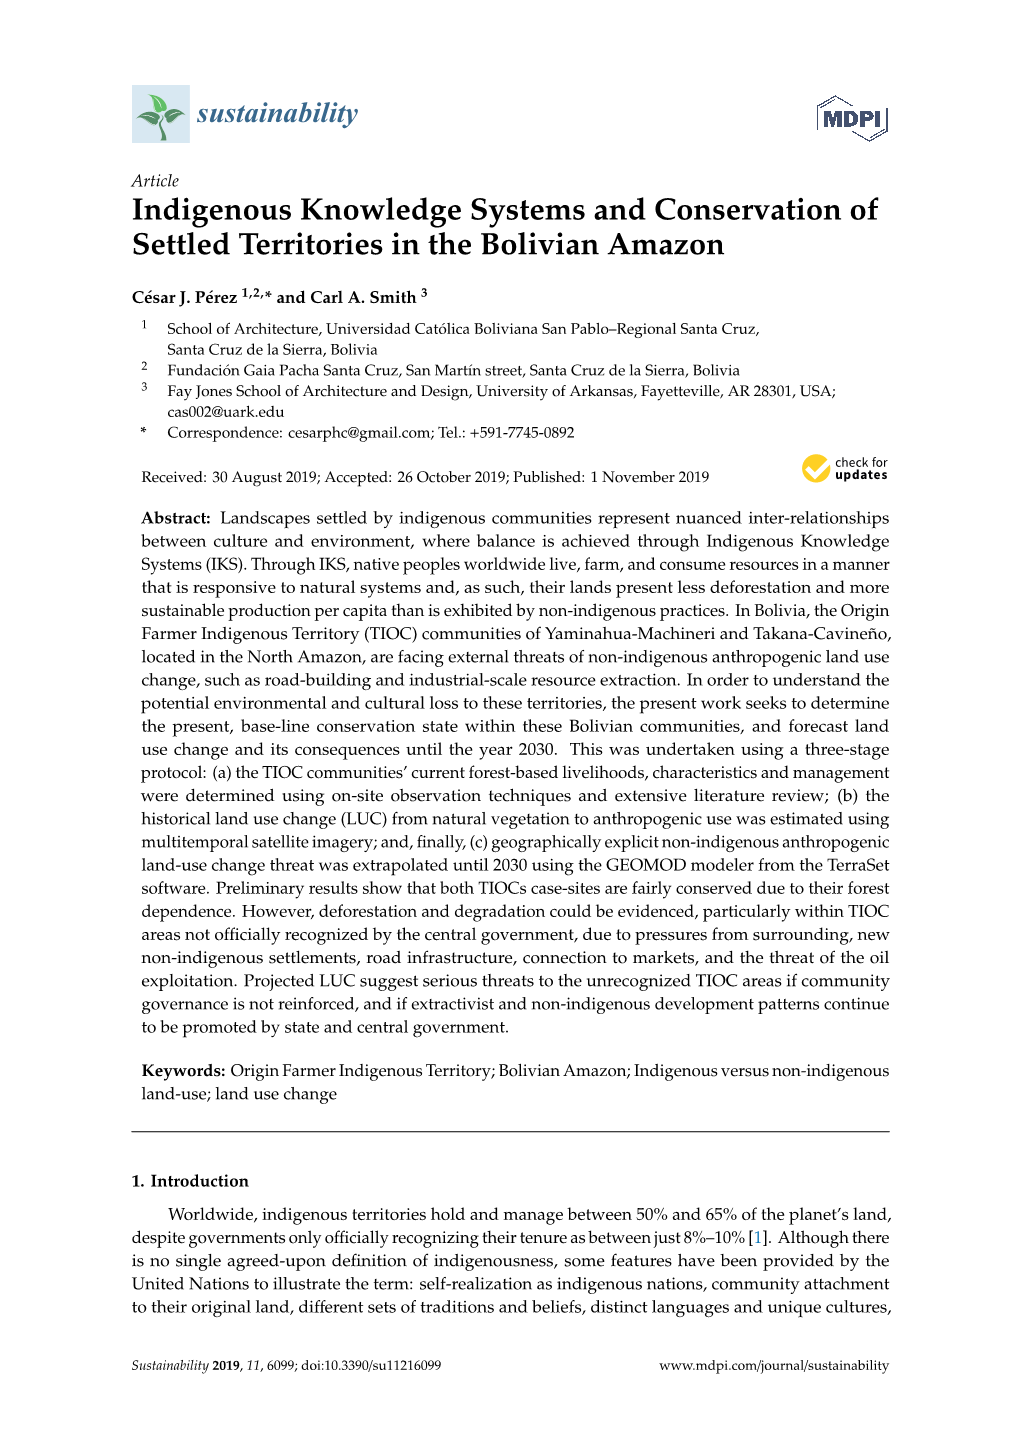 Indigenous Knowledge Systems and Conservation of Settled Territories in the Bolivian Amazon